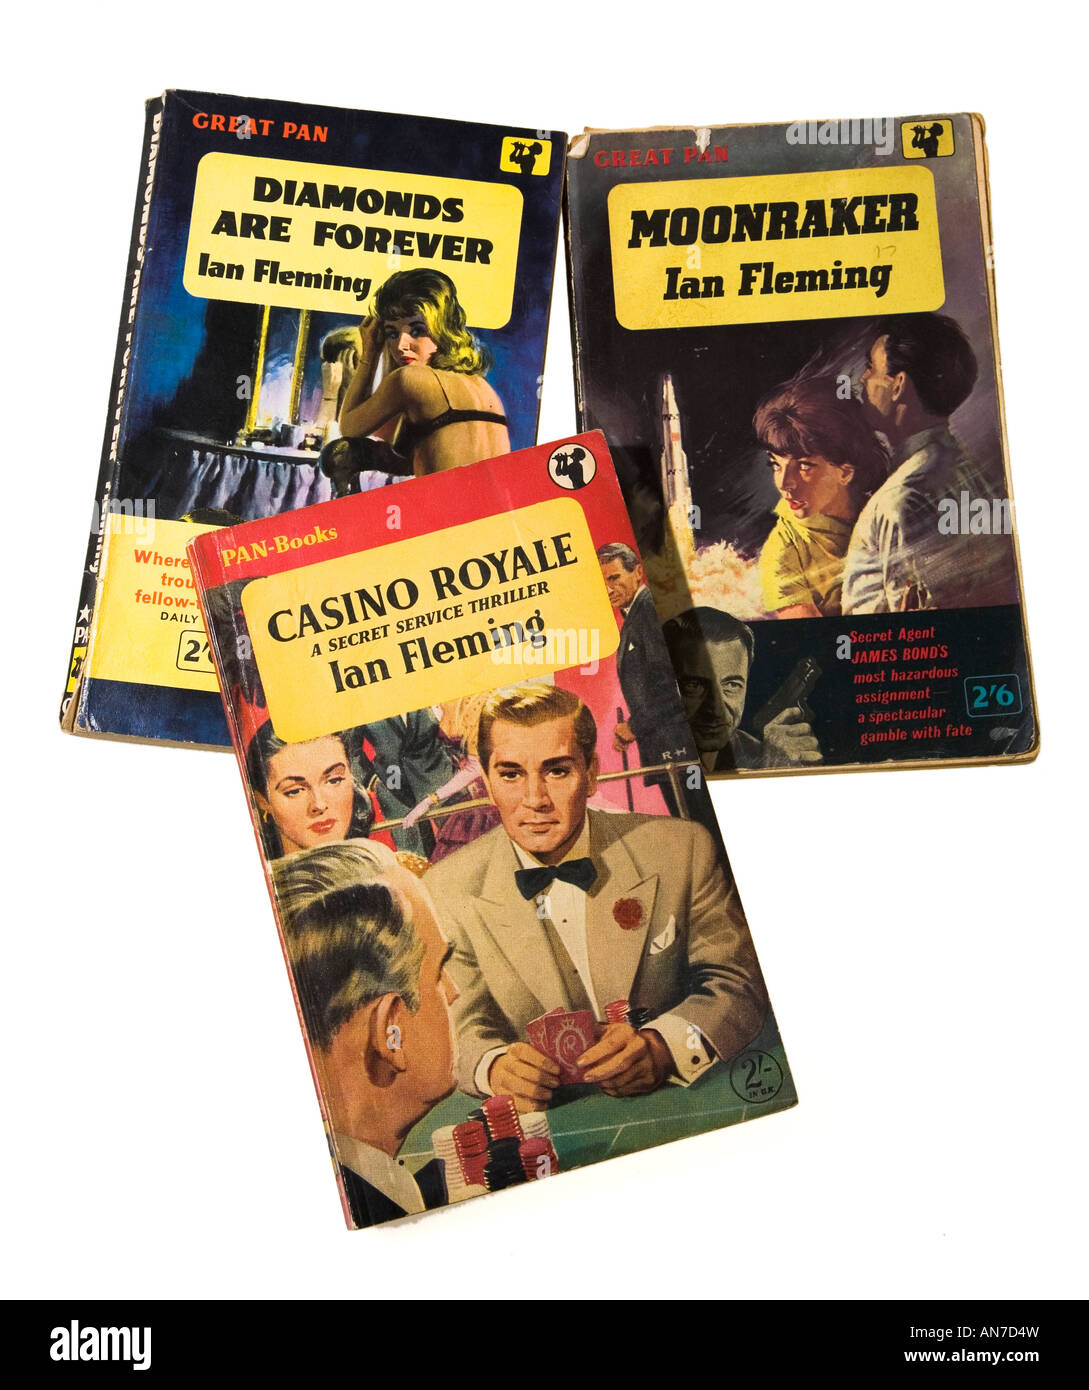 Early issue James Bond paperback books with cover artwork from 1950s Stock Photo